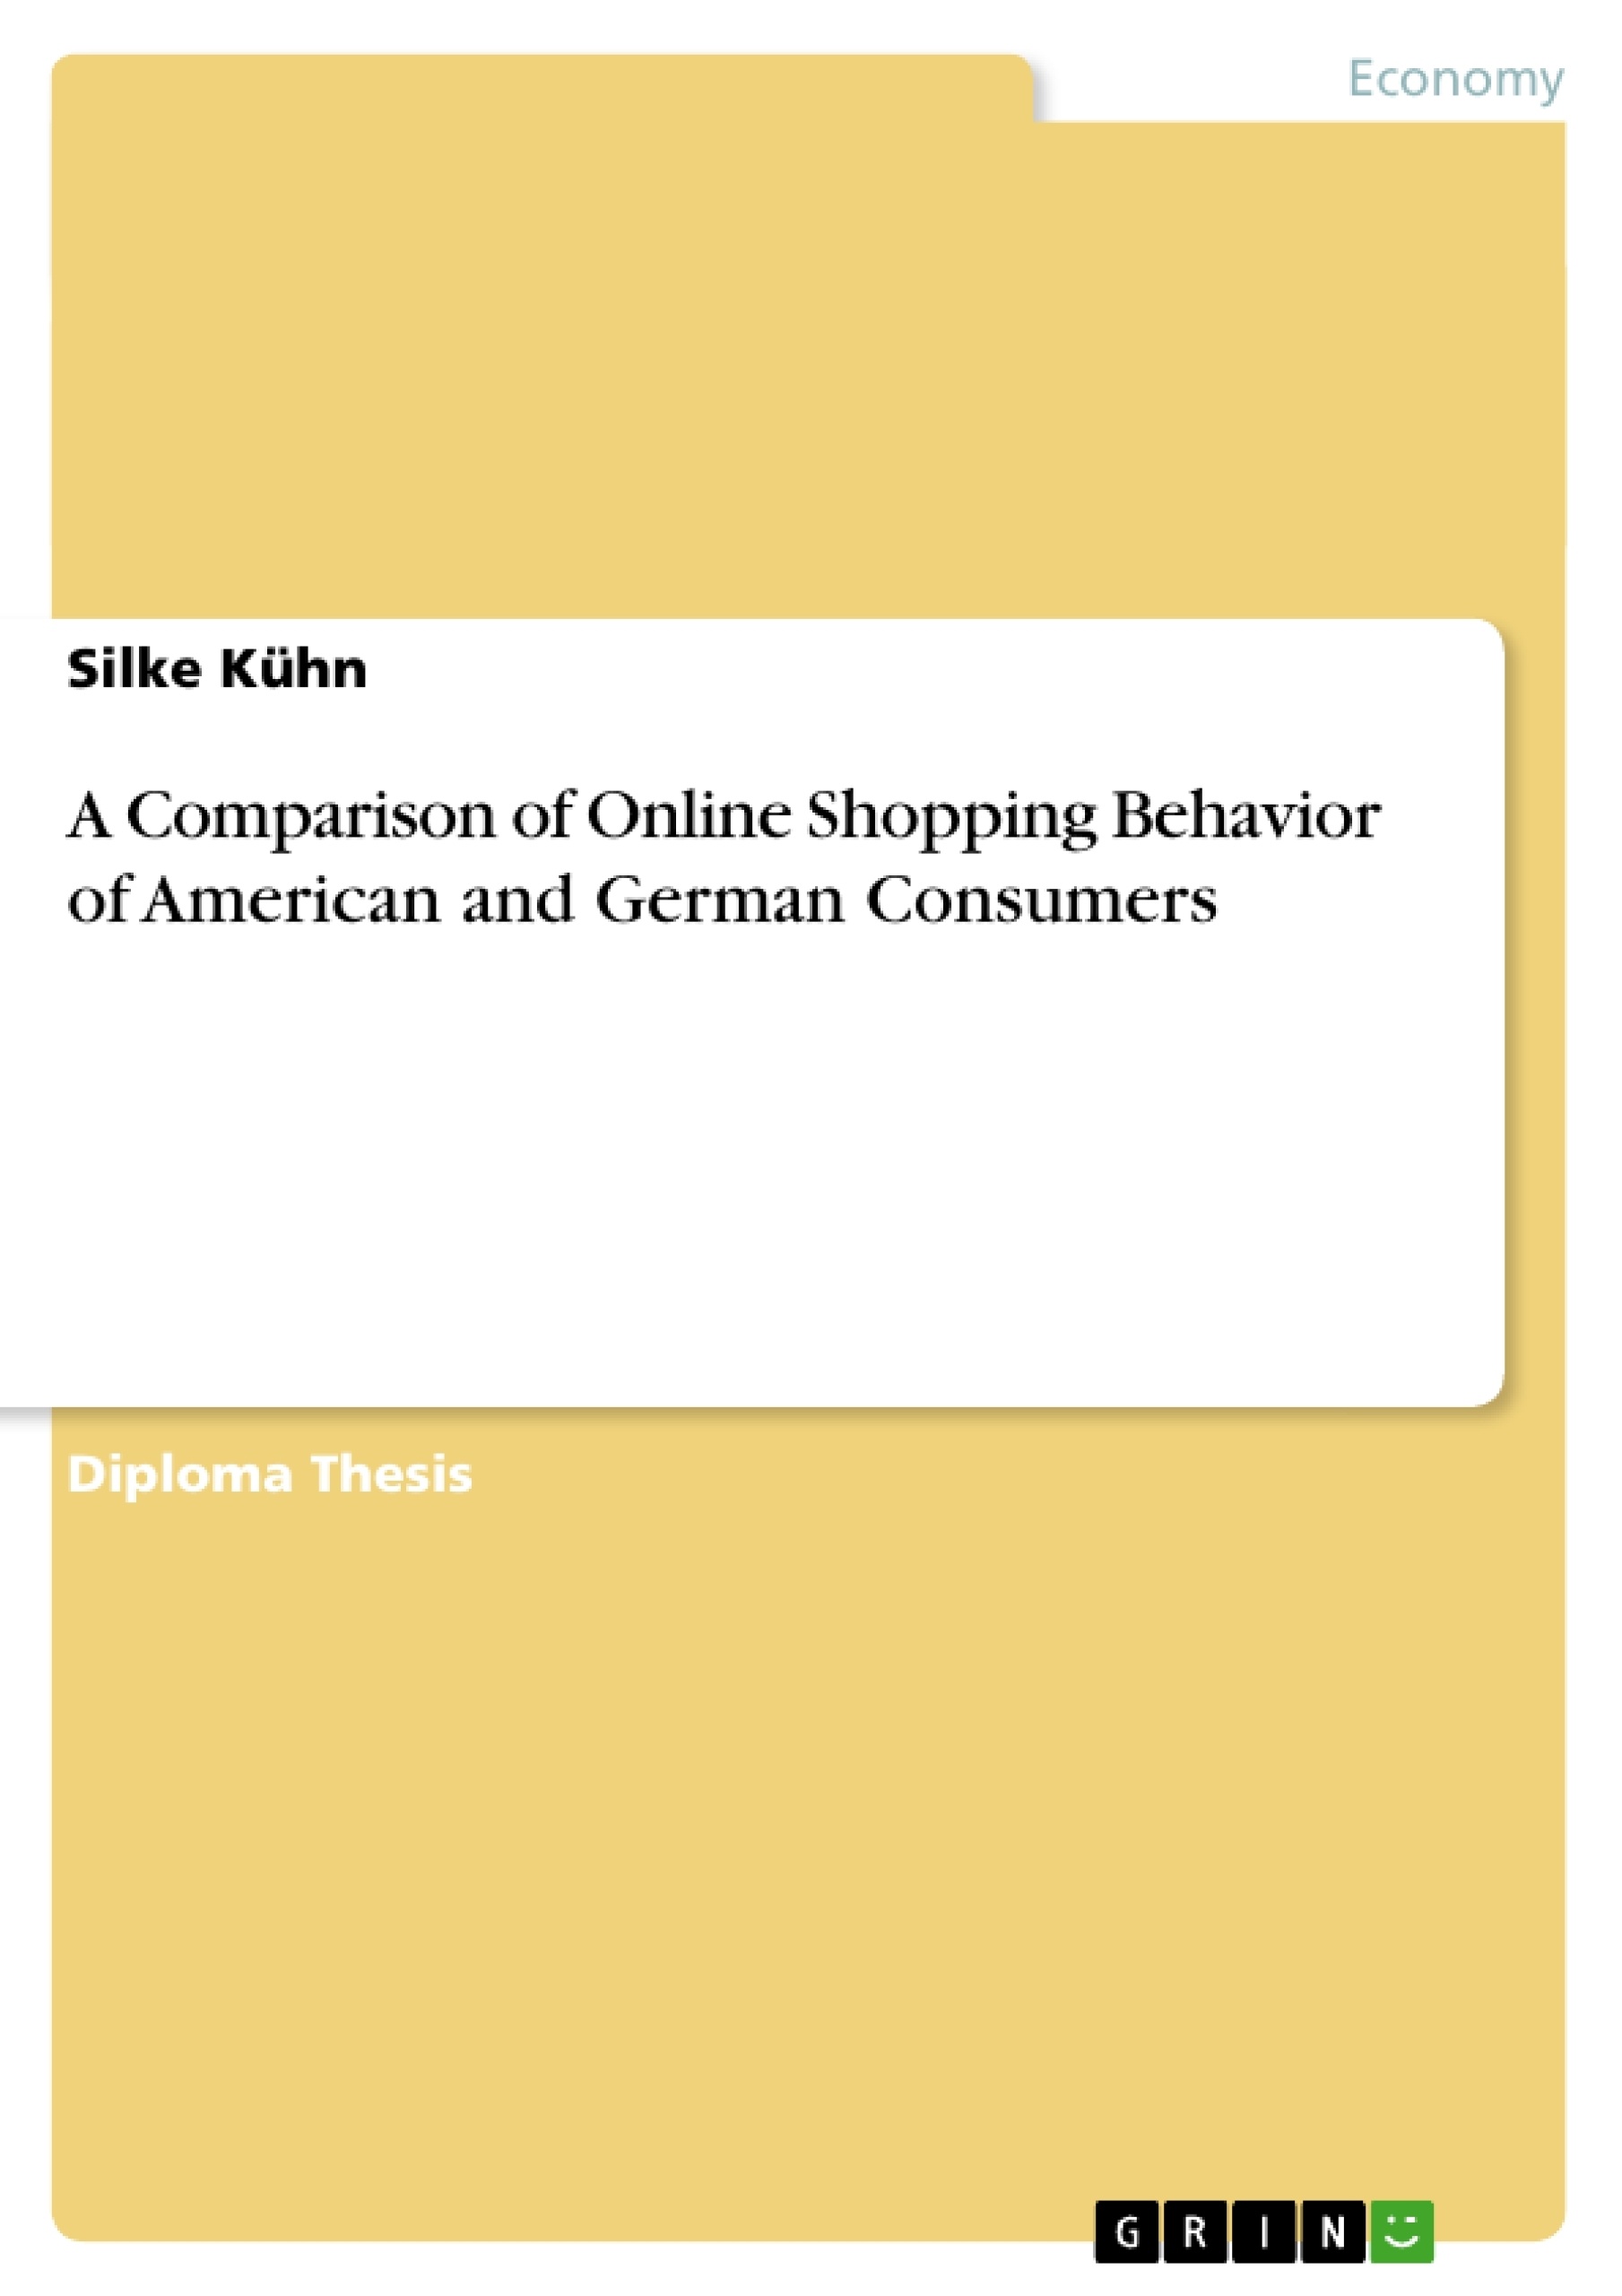 Título: A Comparison of Online Shopping Behavior of American and German Consumers